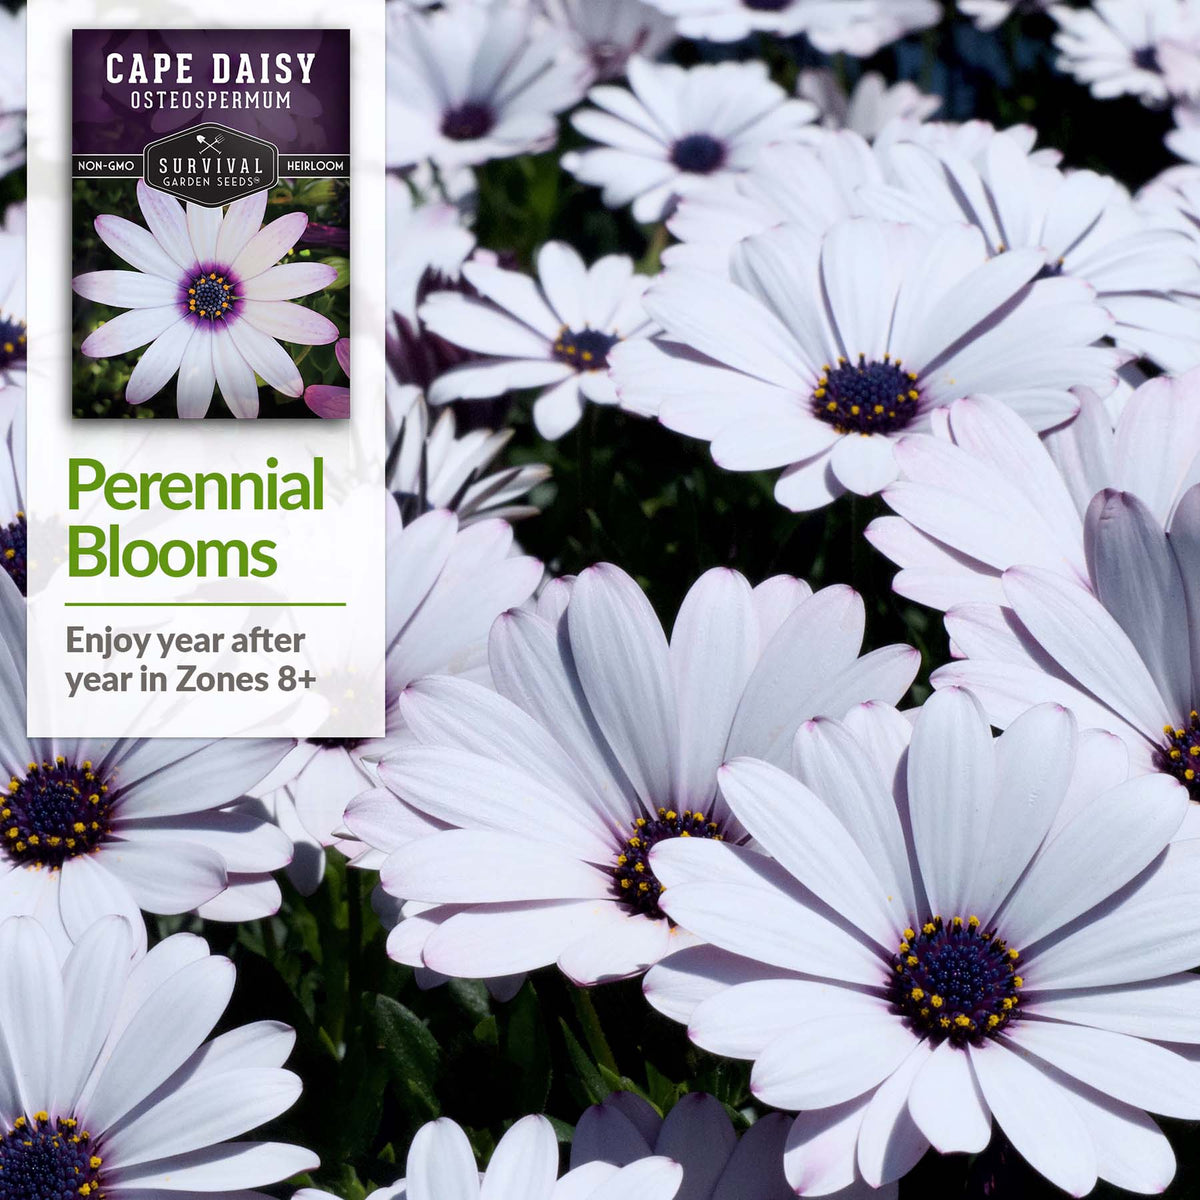 Cape Daisy is perennial in zones 8+